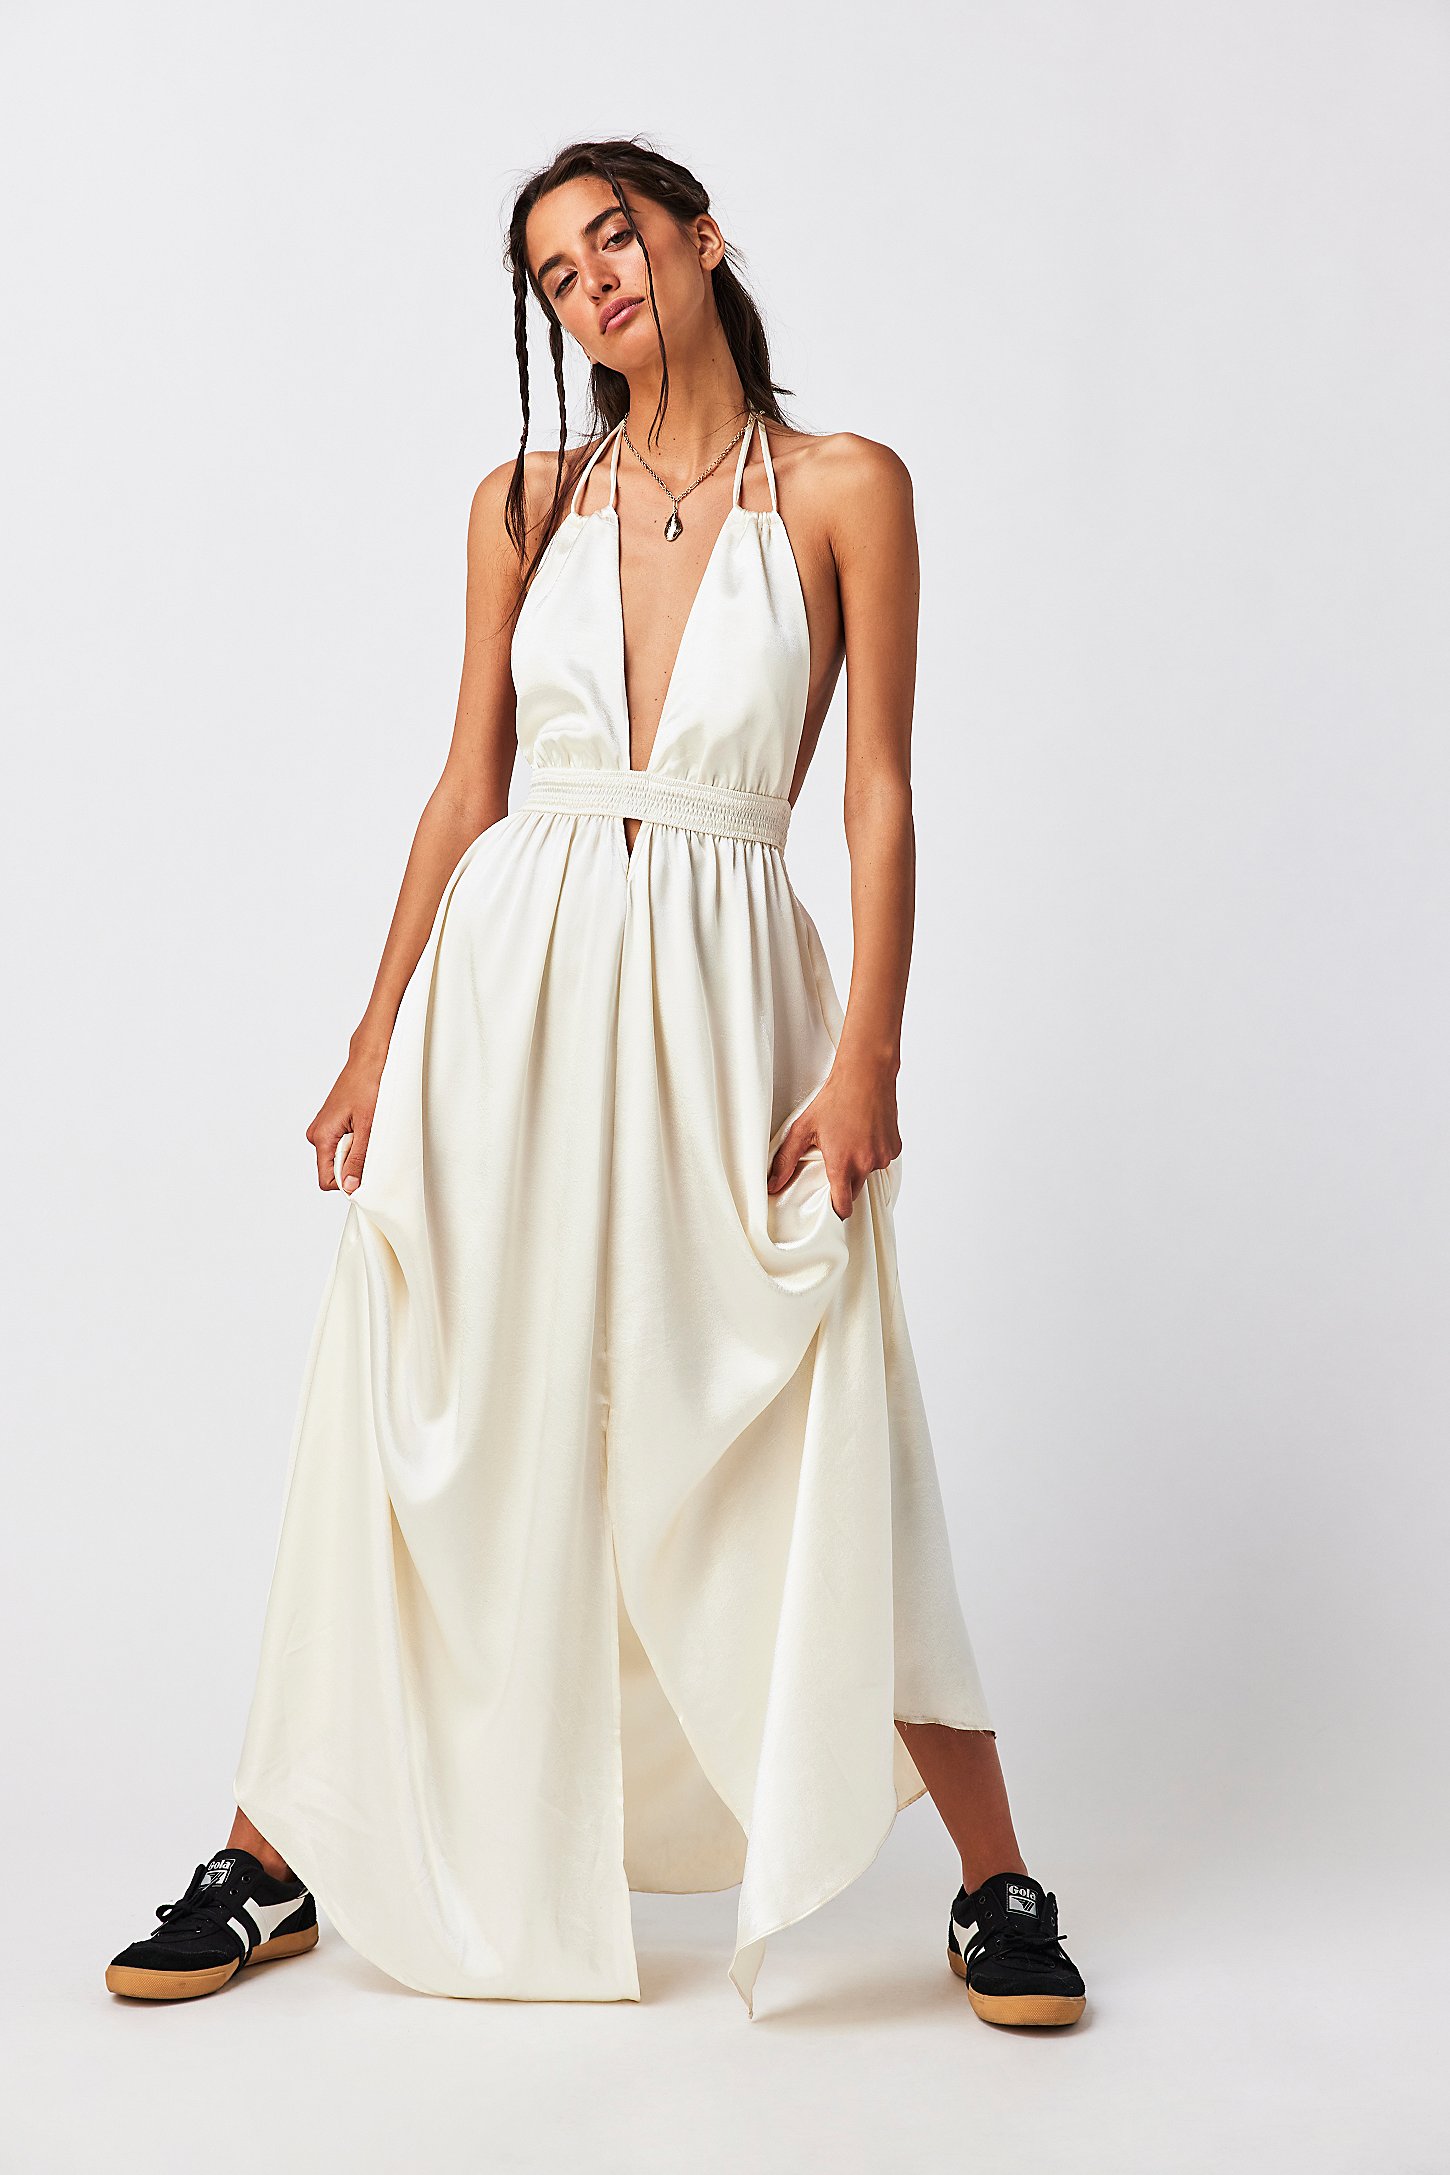 34 Must-Have Free People White Dresses for the Summer - atinydreamer